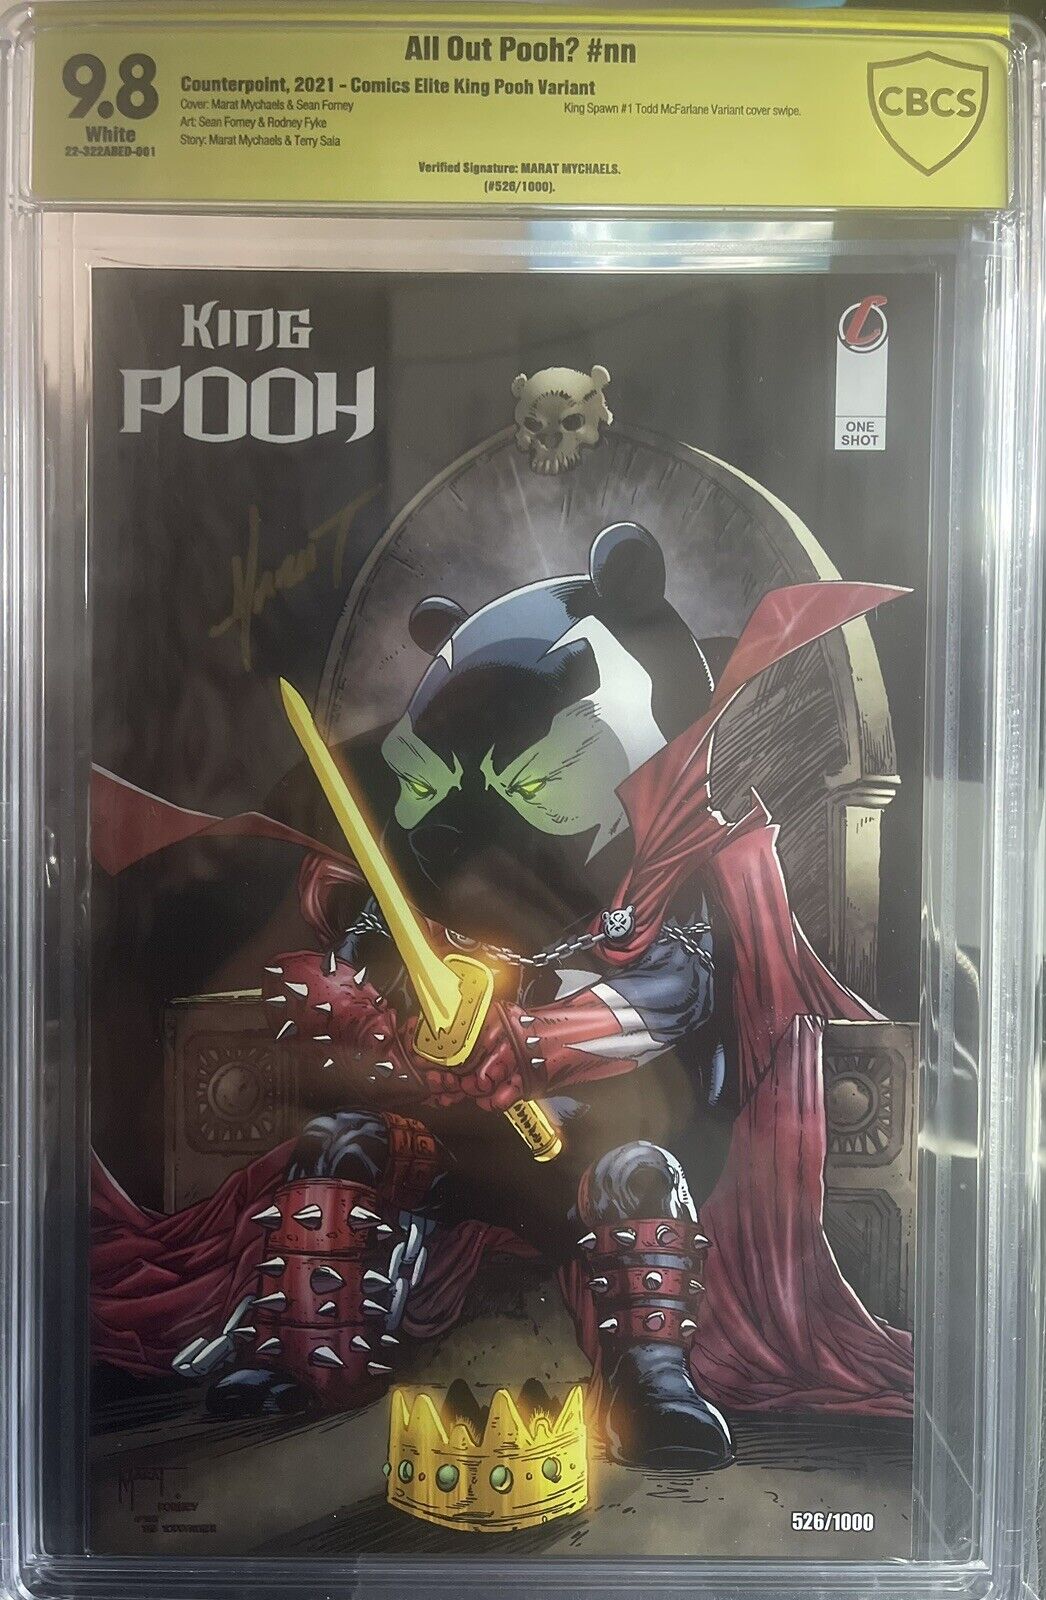 KING POOH CBCS 9.8 SPAWN HOMAGE ALL OUT POOH #1 COVER A MARAT MICHAELS 526/1000